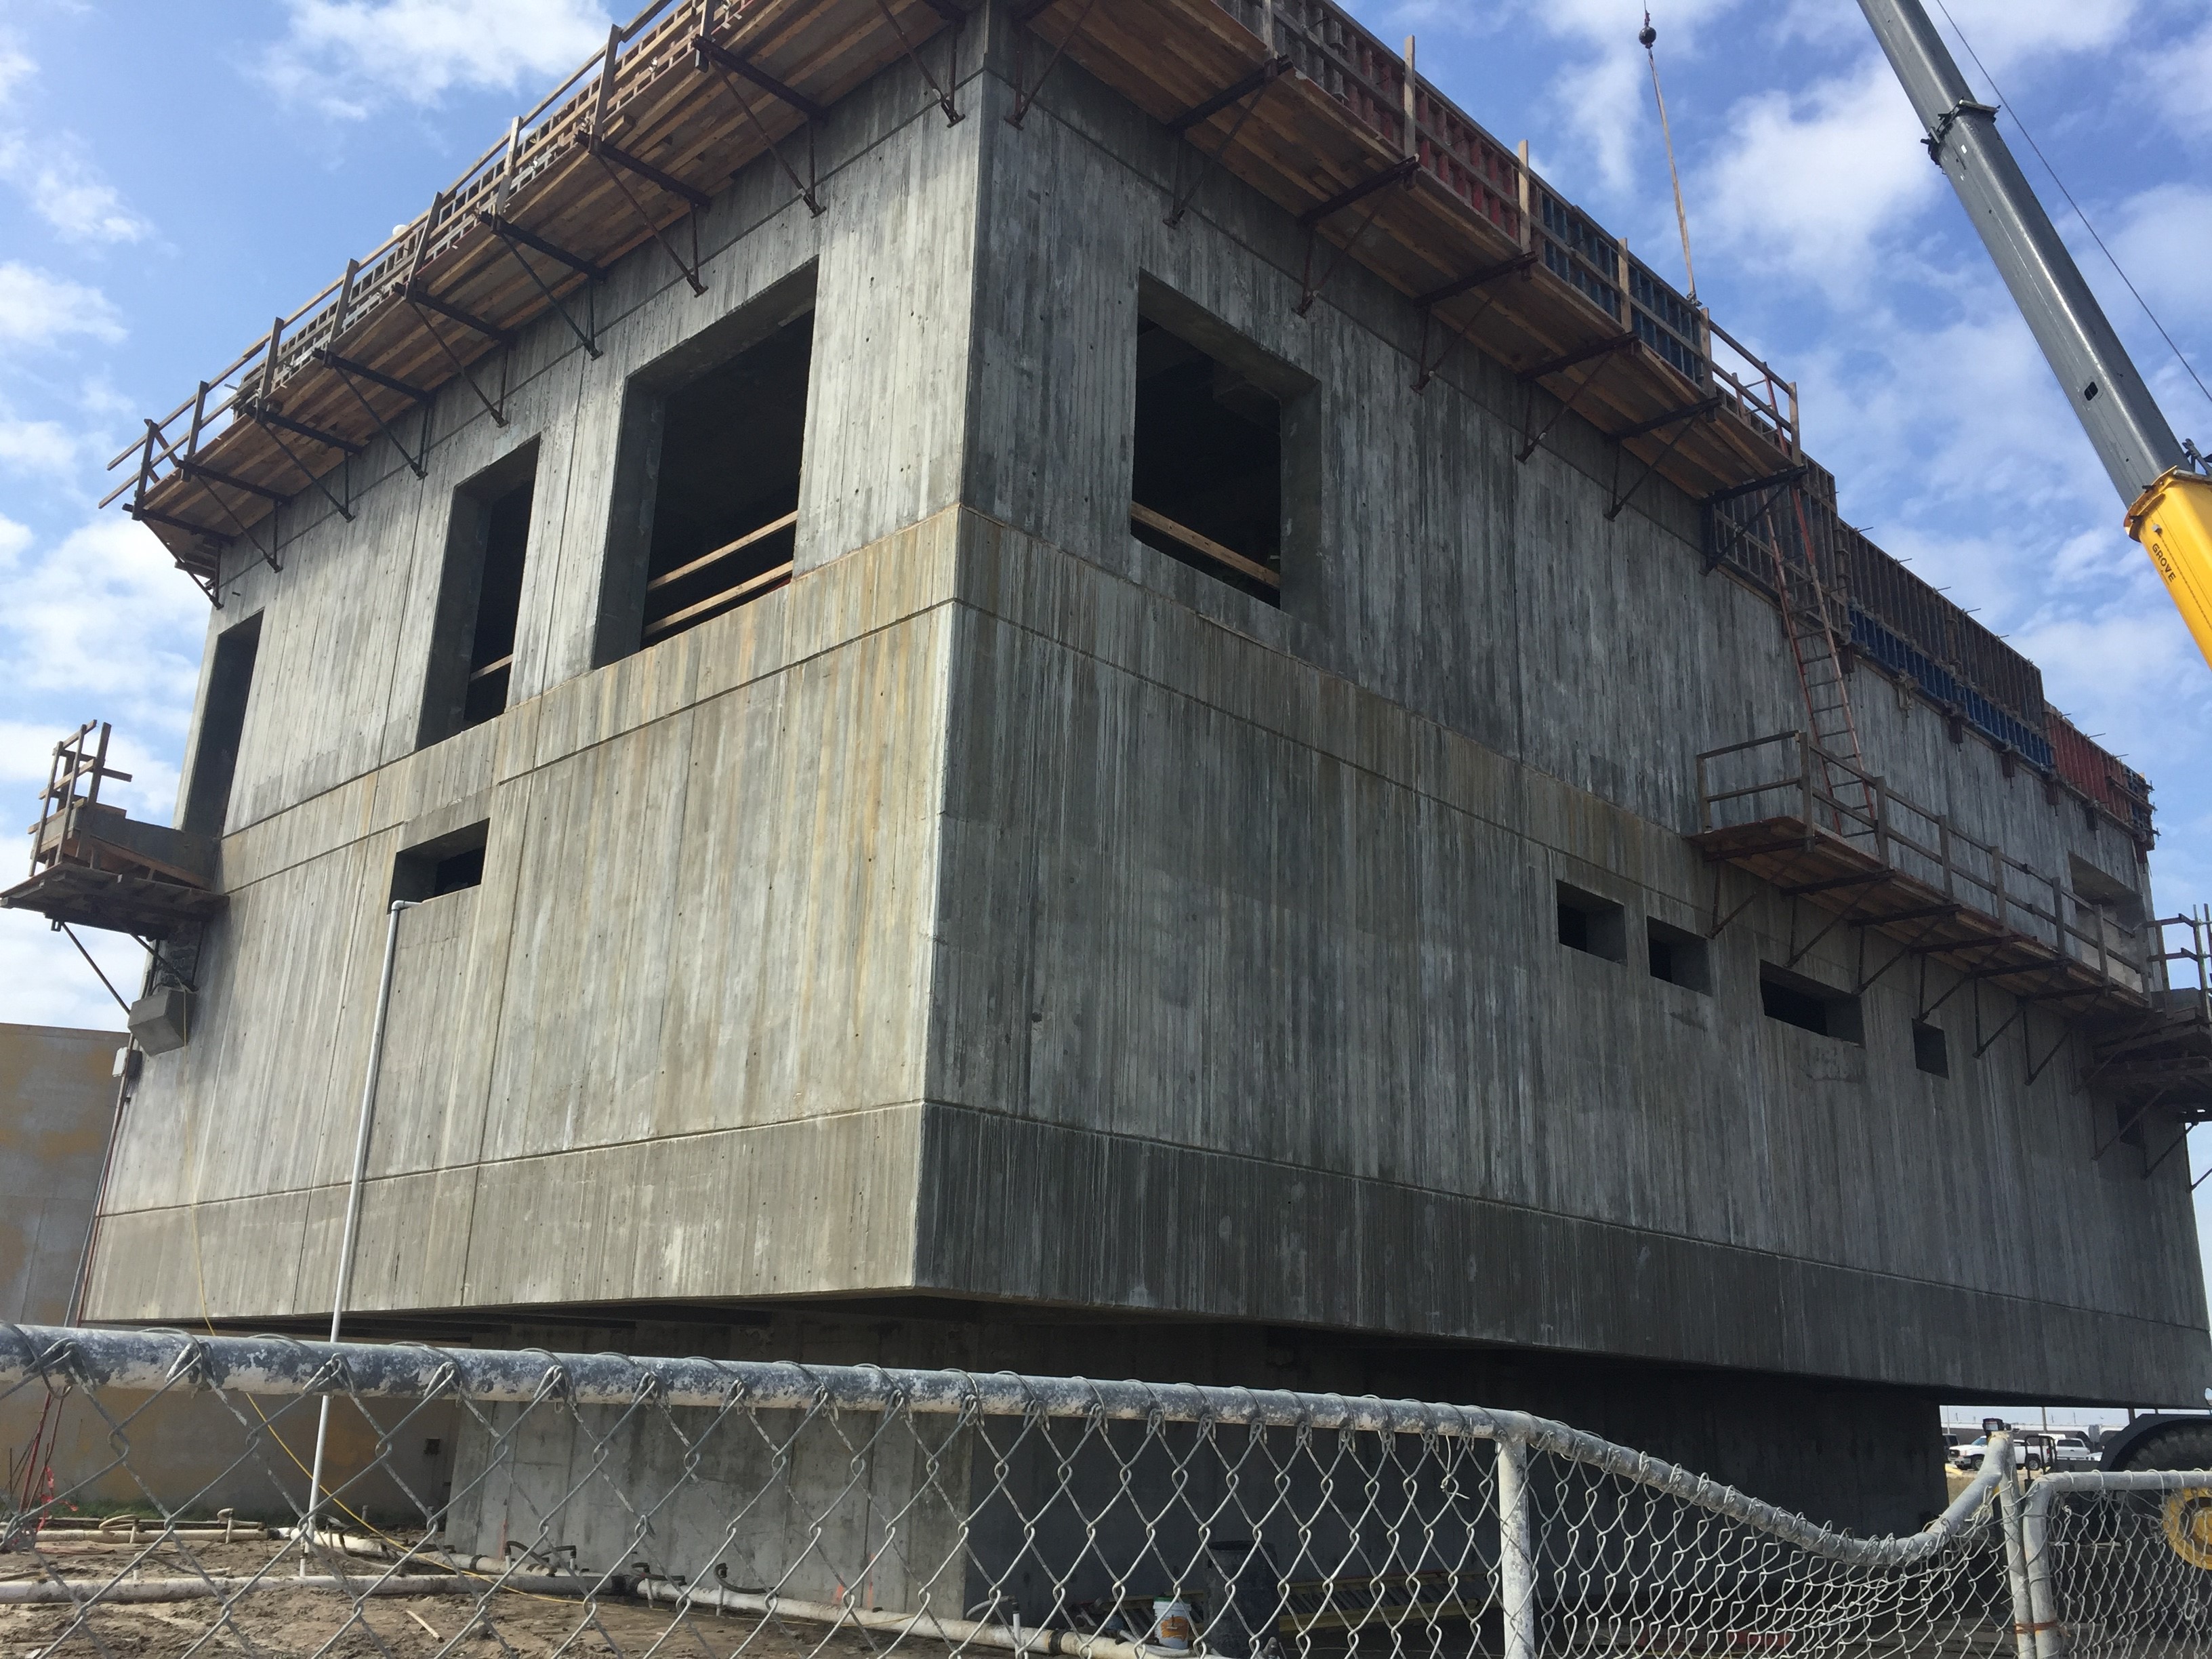 Withstands Category 5 hurricane:  The 59th Street Pump Station has no doors, windows, or minor pipe penetrations below a 25-foot elevation; PENETRON ADMIX treated all concrete below that level.